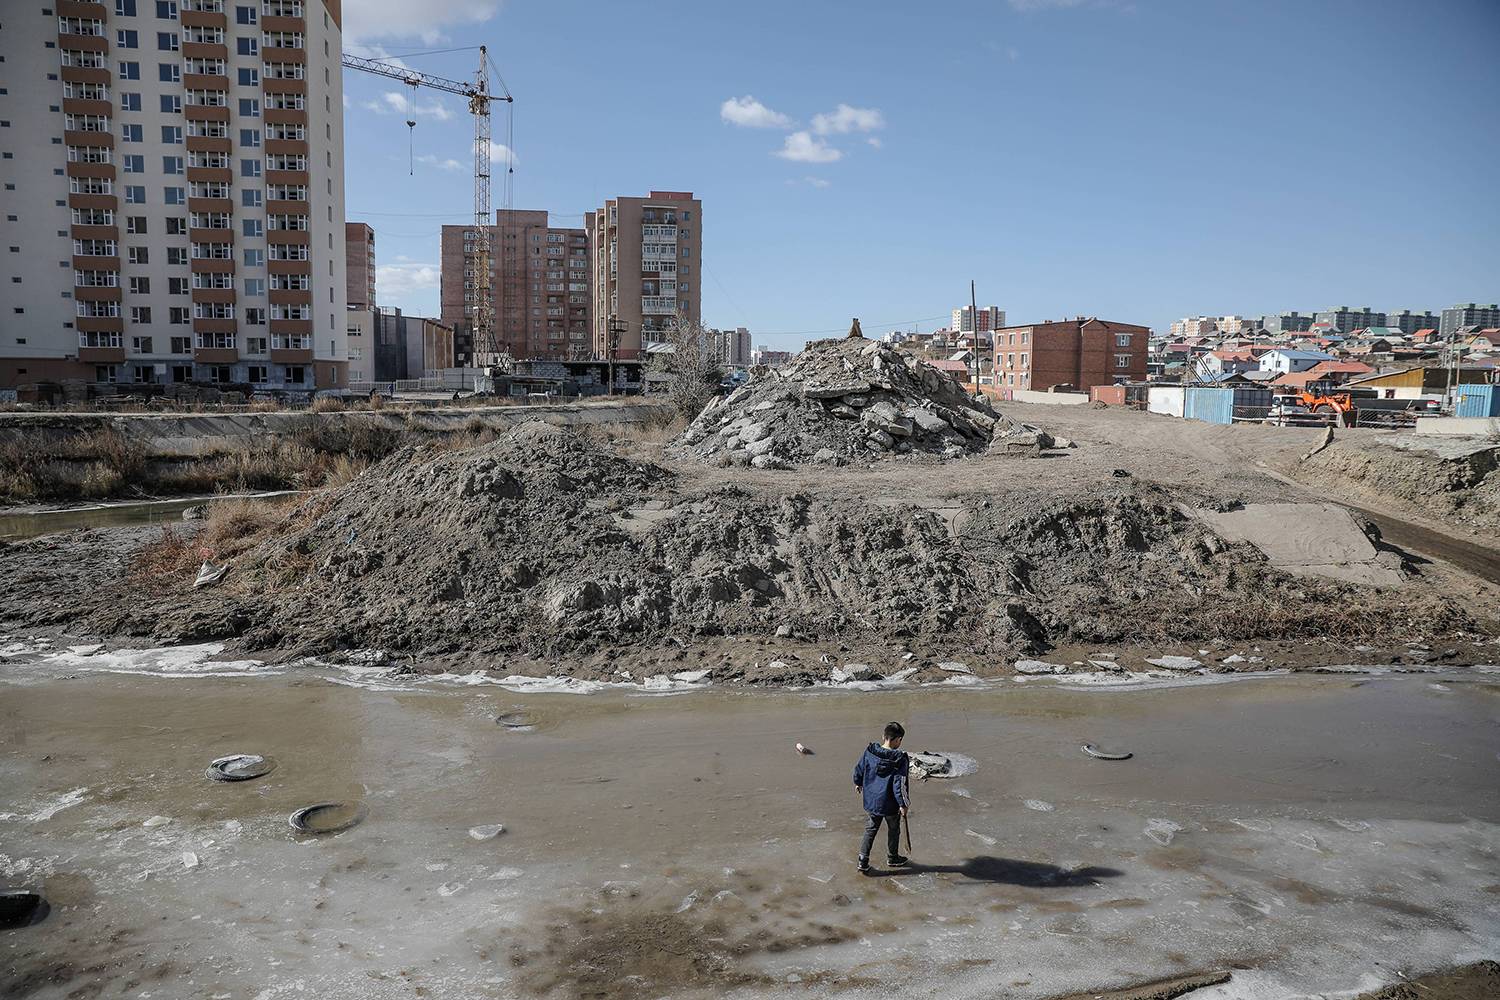 Mongolia is Surfing the “Renovation Wave” through Construction Materials Recovery